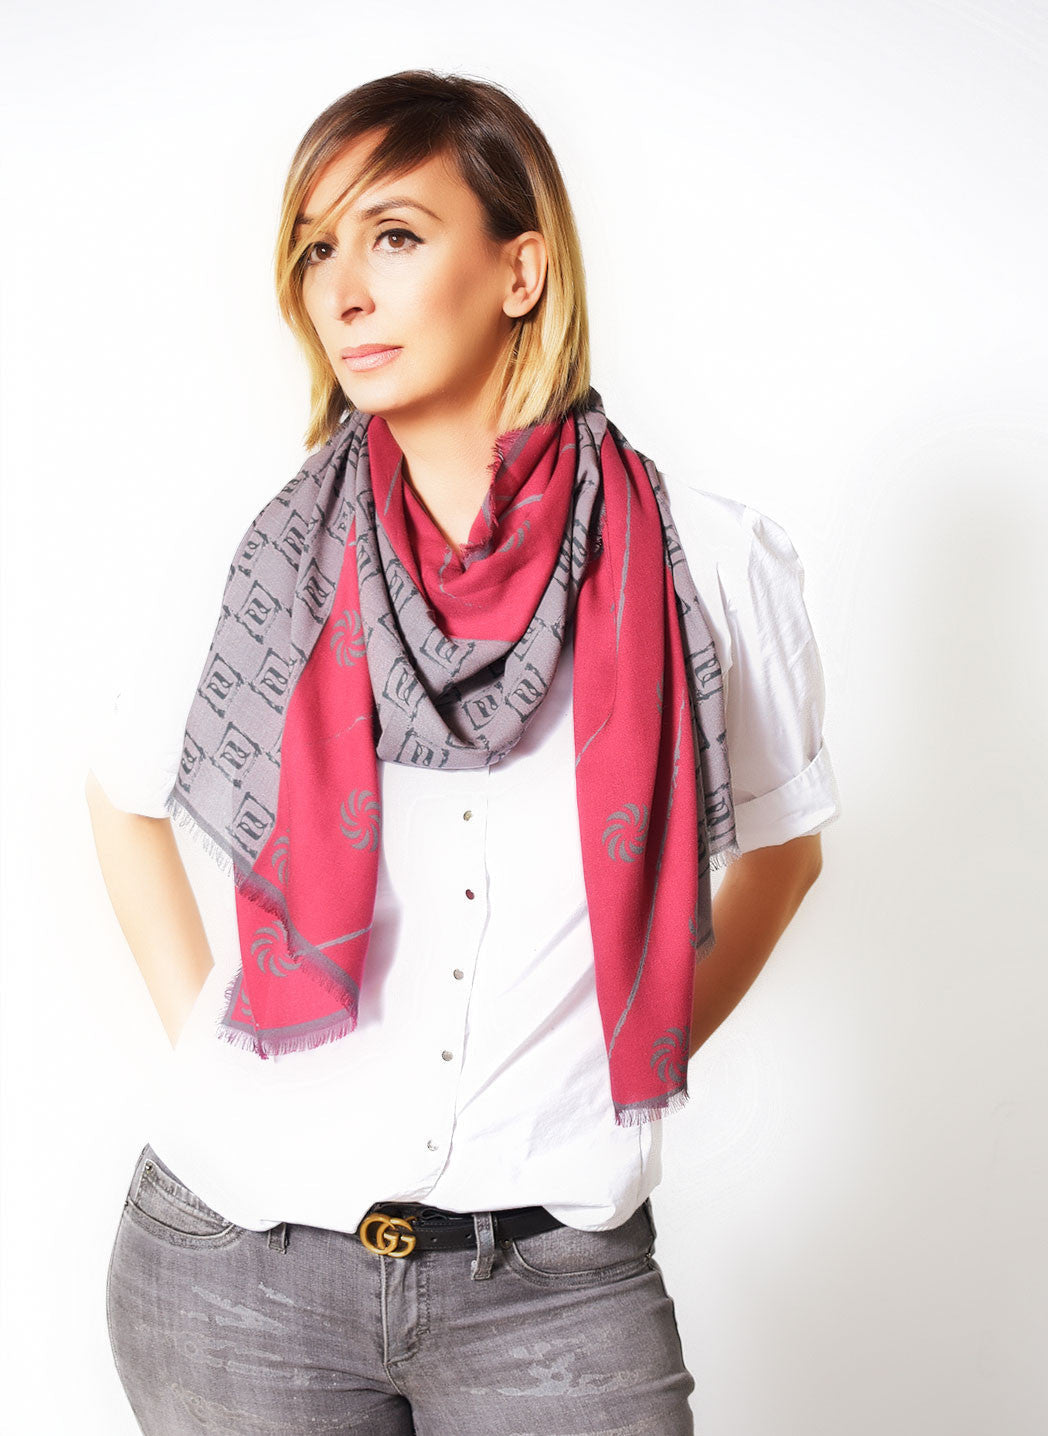 Eternity Burgundy Unisex Scarf - Anet's Collection - 1